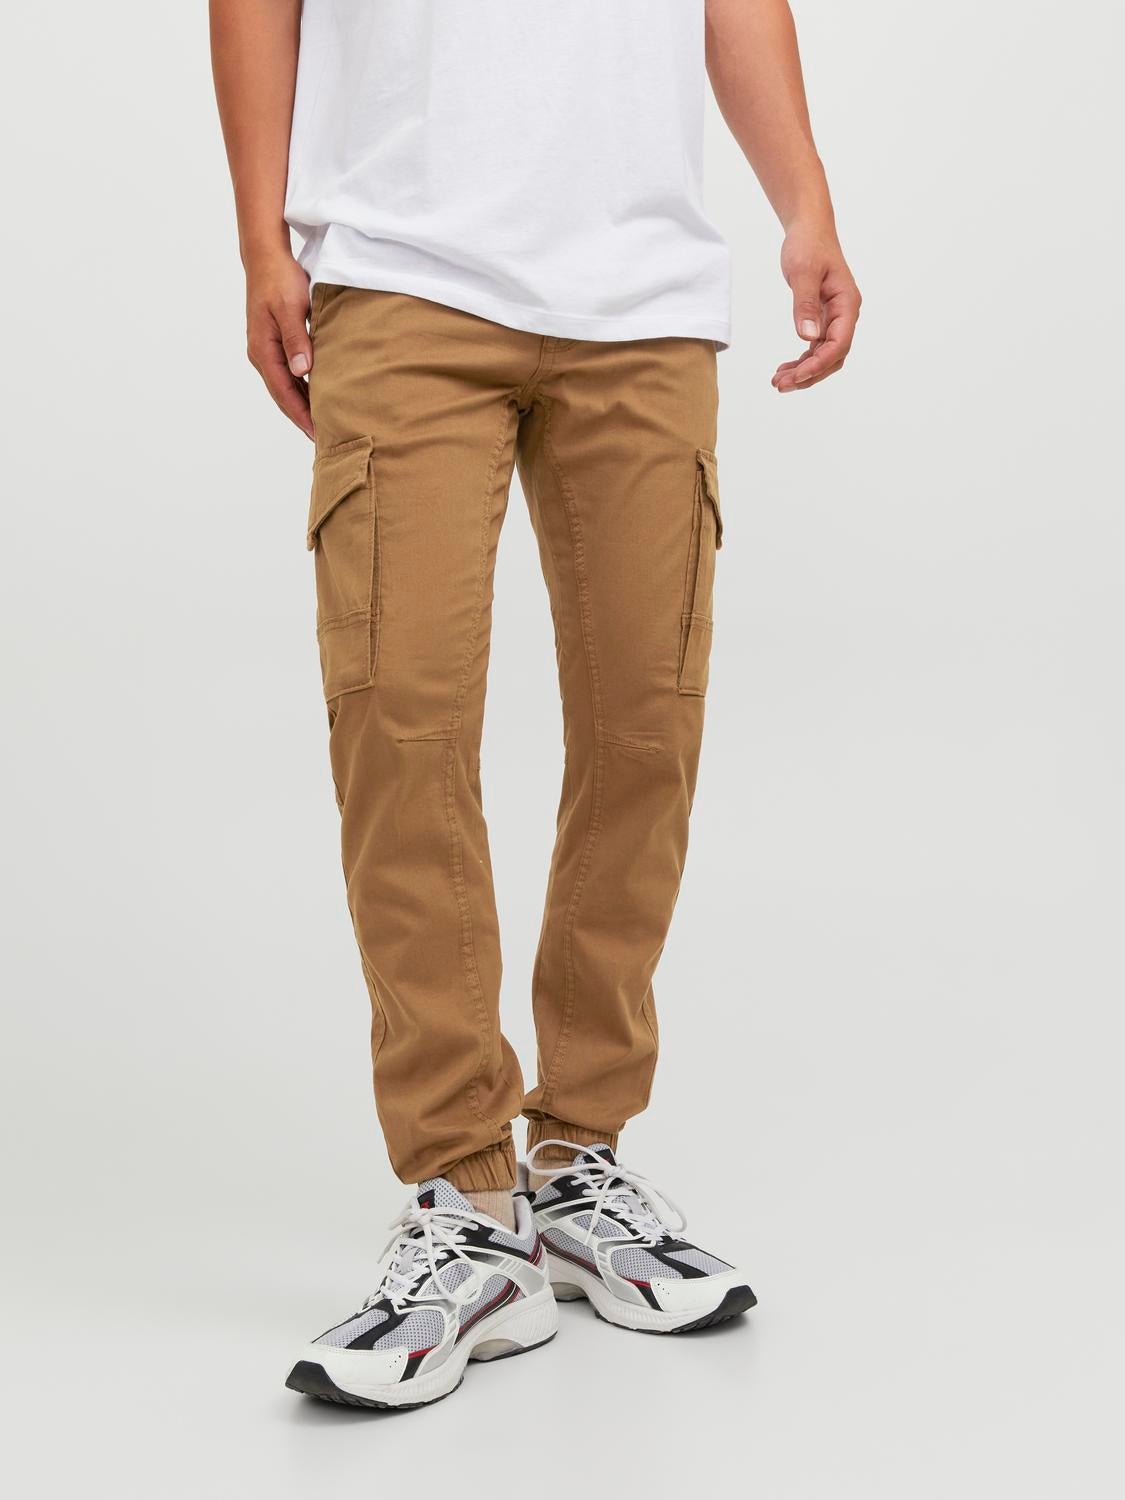 Baggy Black Cargo Pants For Men Khaki Vintage Wide Leg Cargo Trousers For  Casual Autumn Streetwear And Hip Hop Loose Fit Japanese Style 220811  ByHOUZHOU From Bai02, $19.81 | DHgate.Com